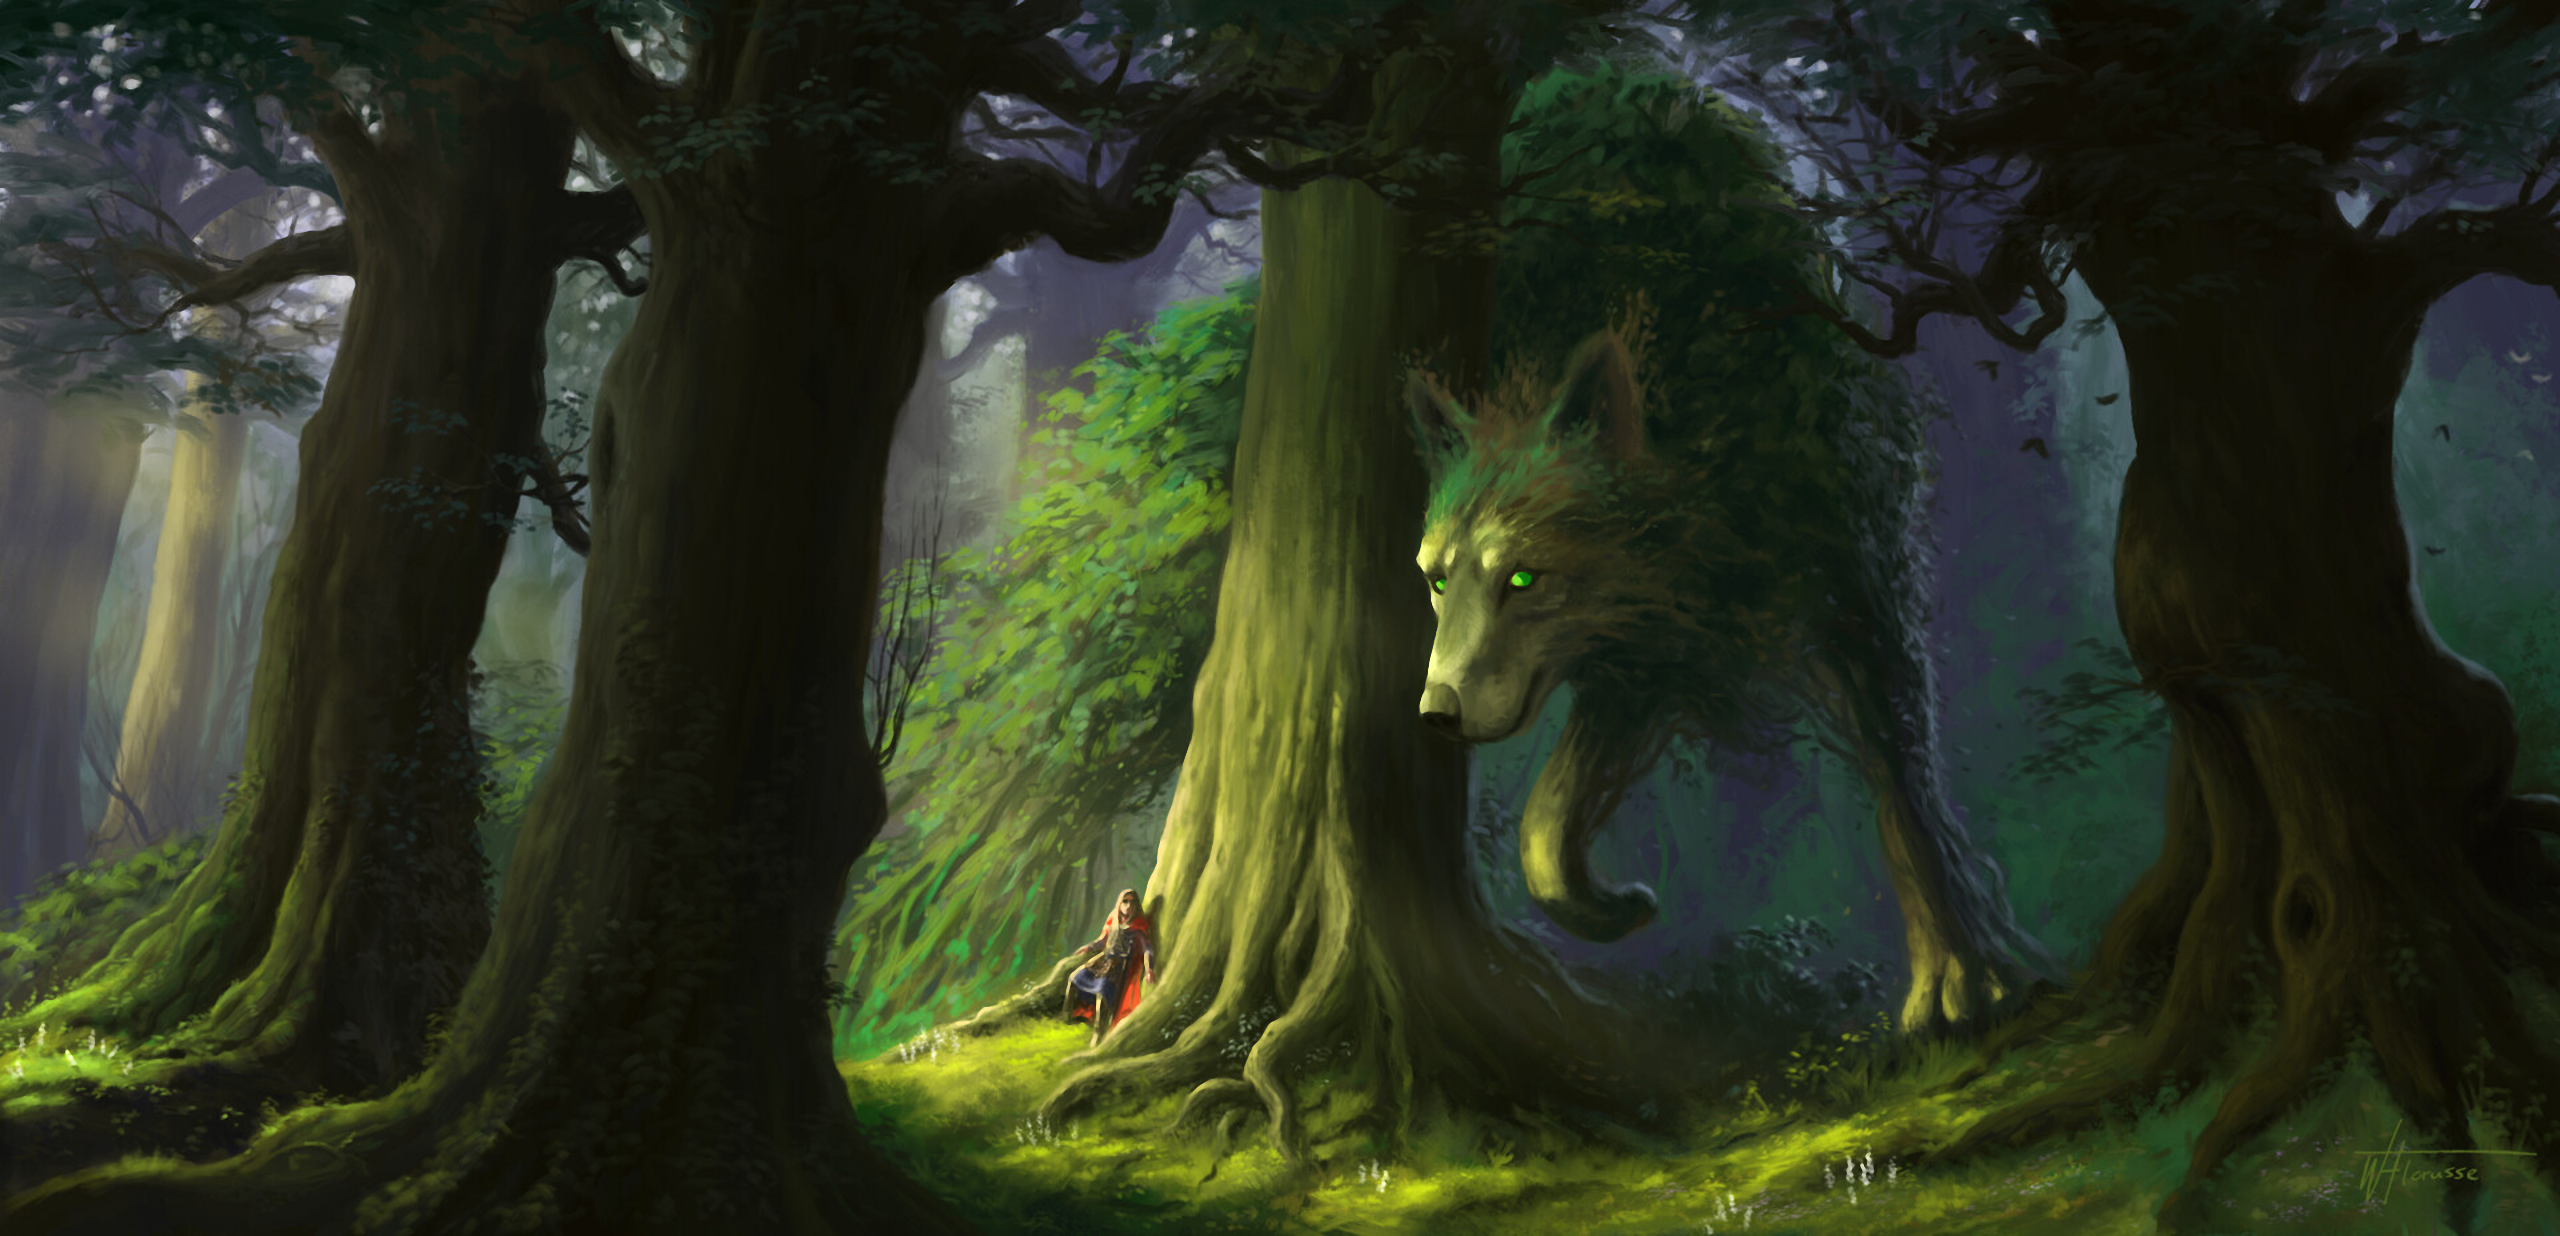 General 2560x1236 digital art artwork fantasy art nature landscape forest trees drawing painting digital painting animals wolf green wood creature fictional creatures environment concept art